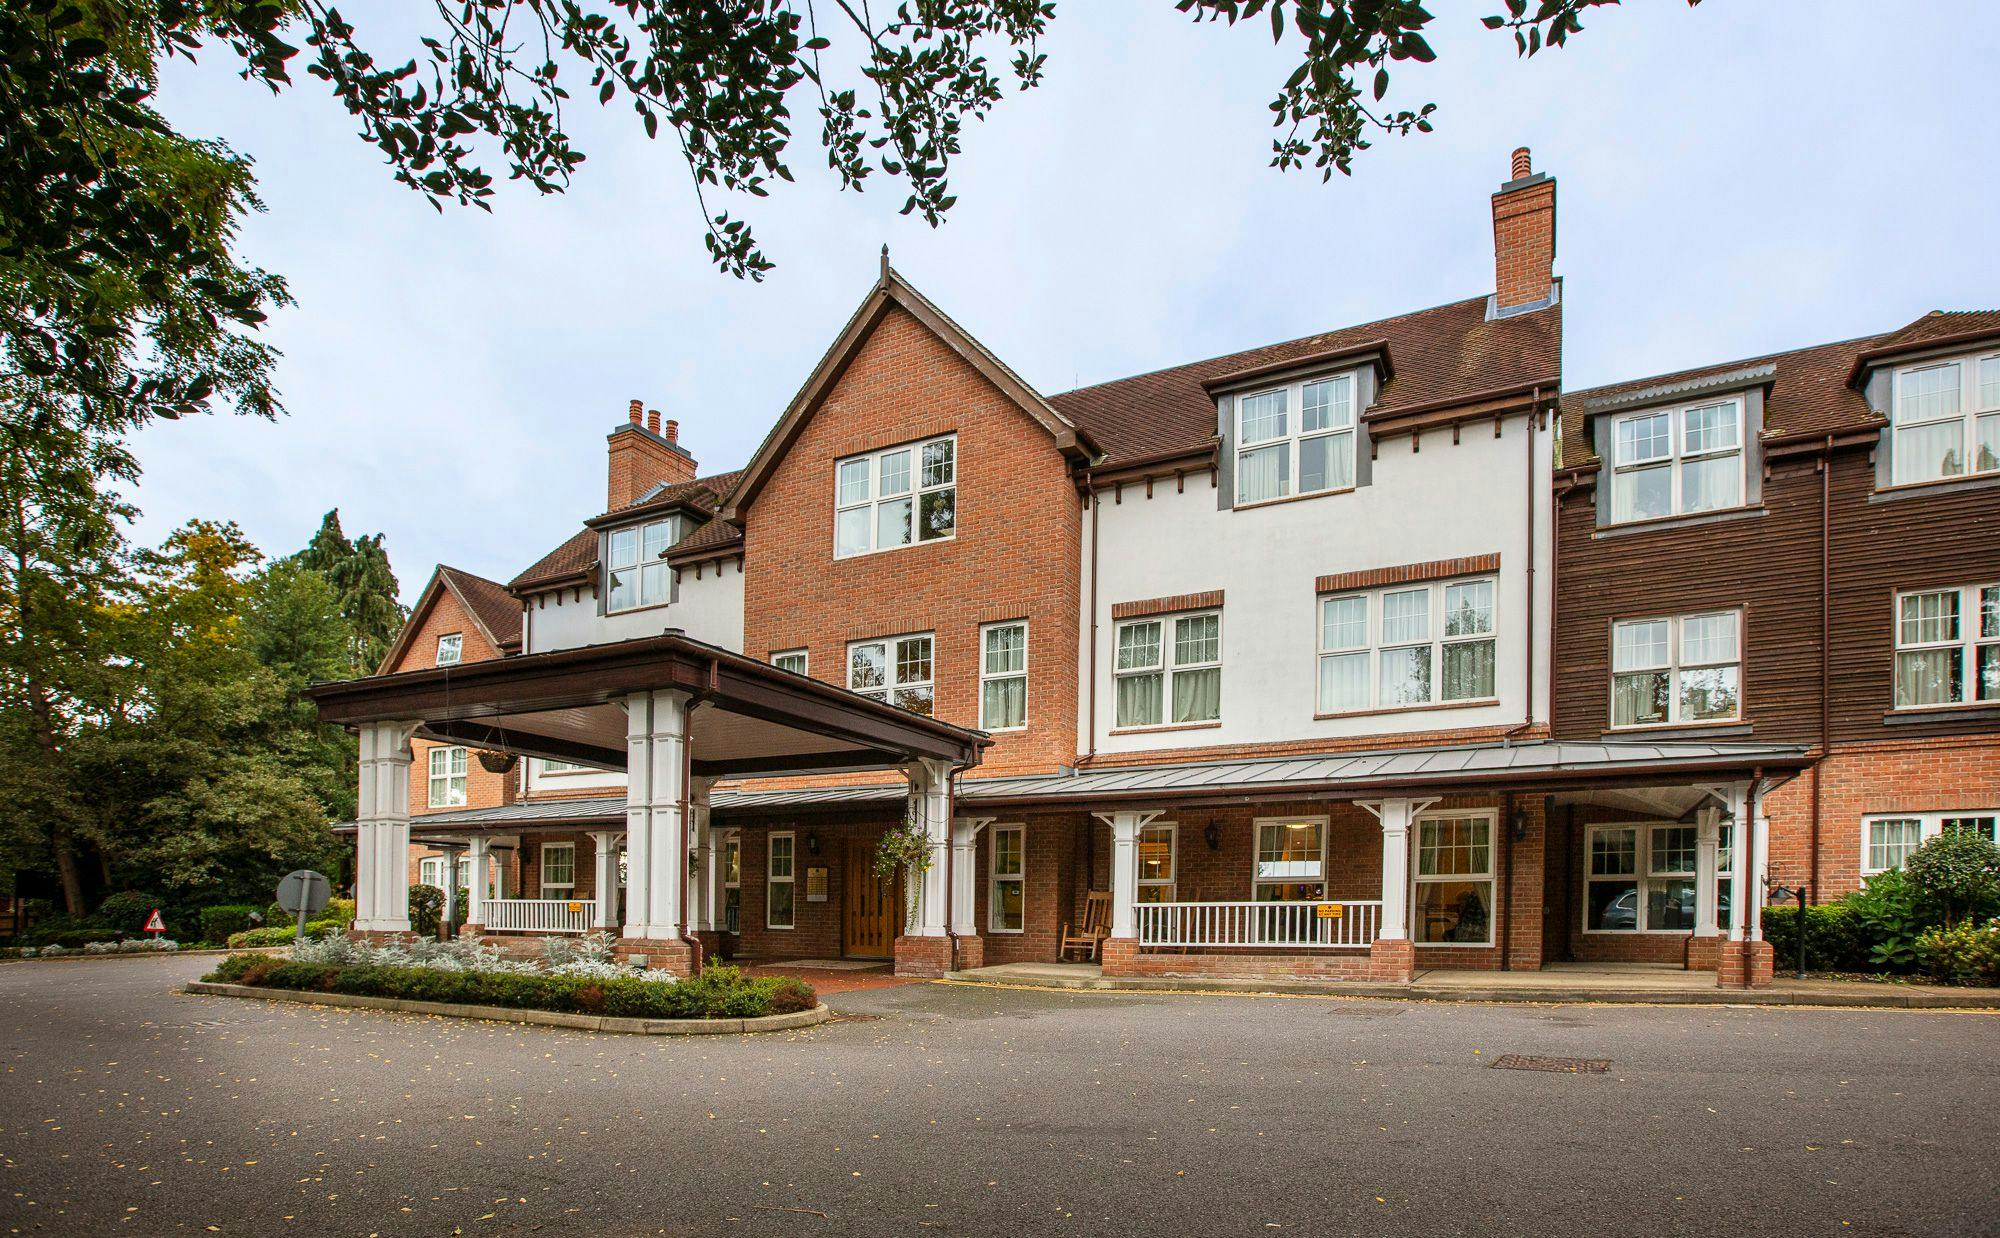 Exterior of Esher Manor Care Home in Esher, Surrey